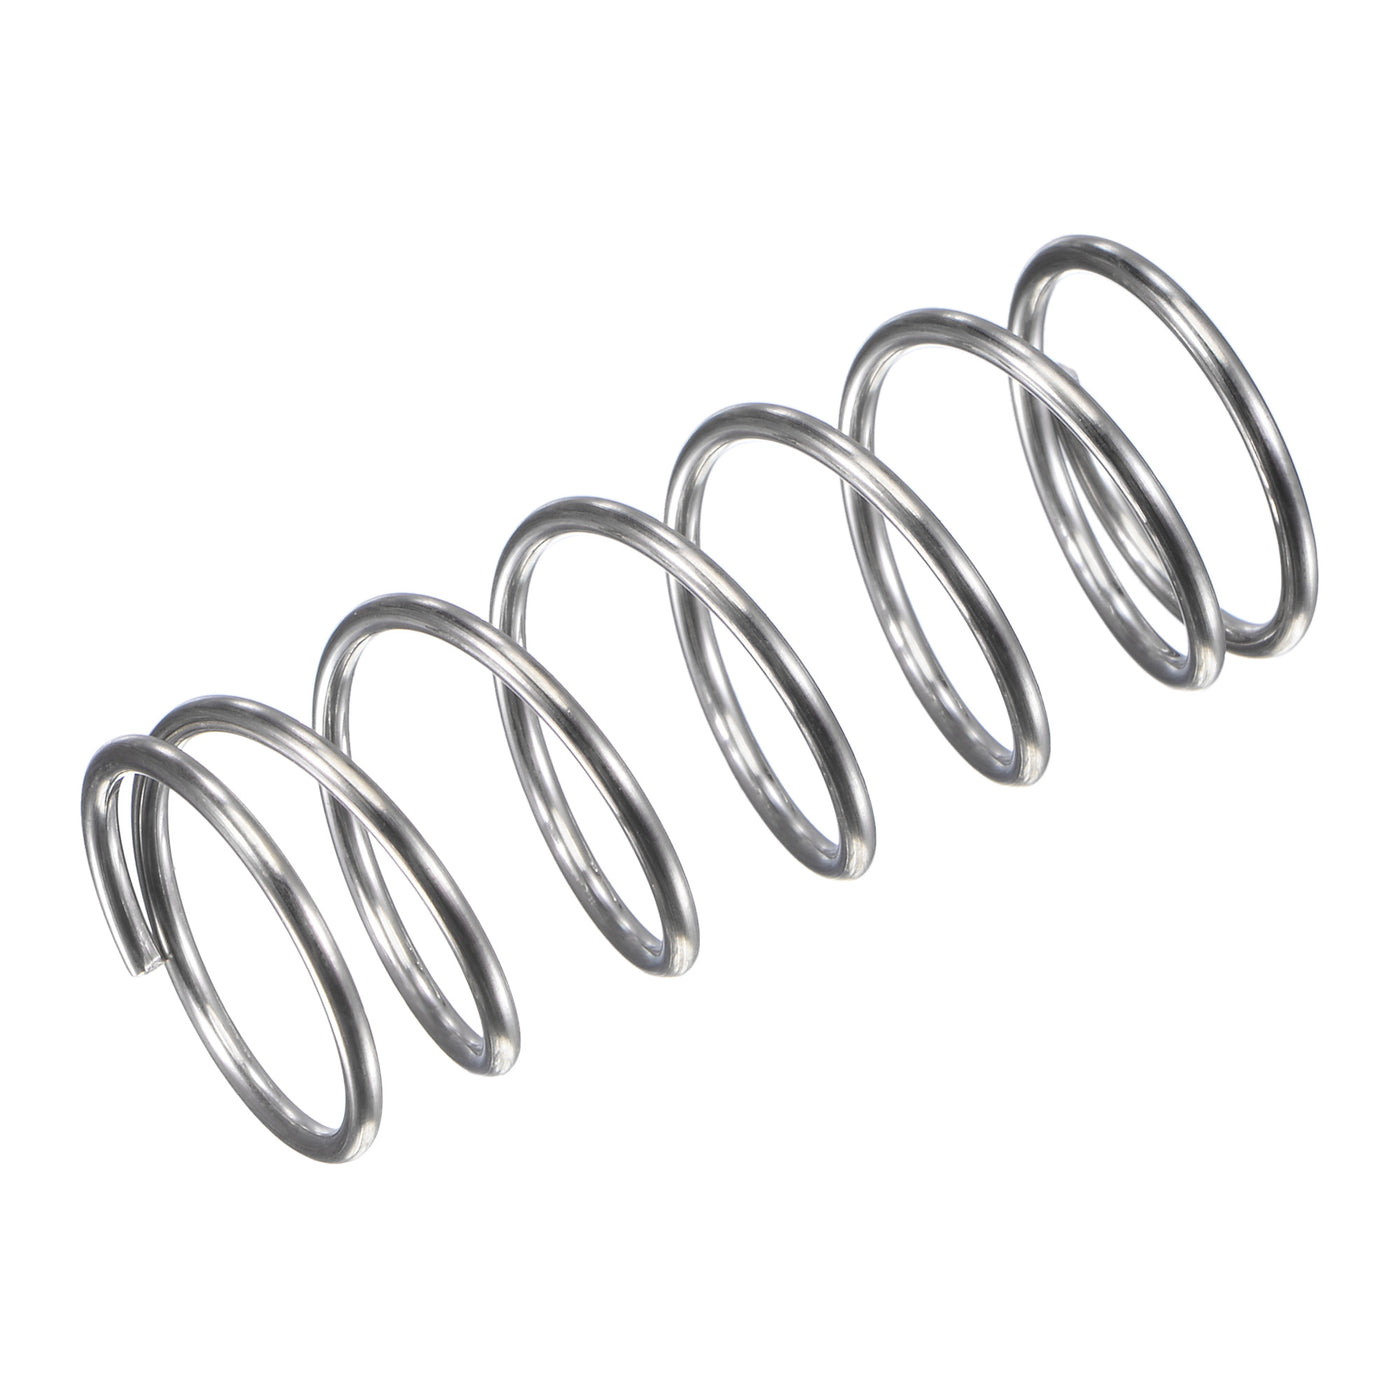 uxcell Uxcell 15mmx1.2mmx36mm 304 Stainless Steel Compression Spring 15.7N Load Capacity 10pcs